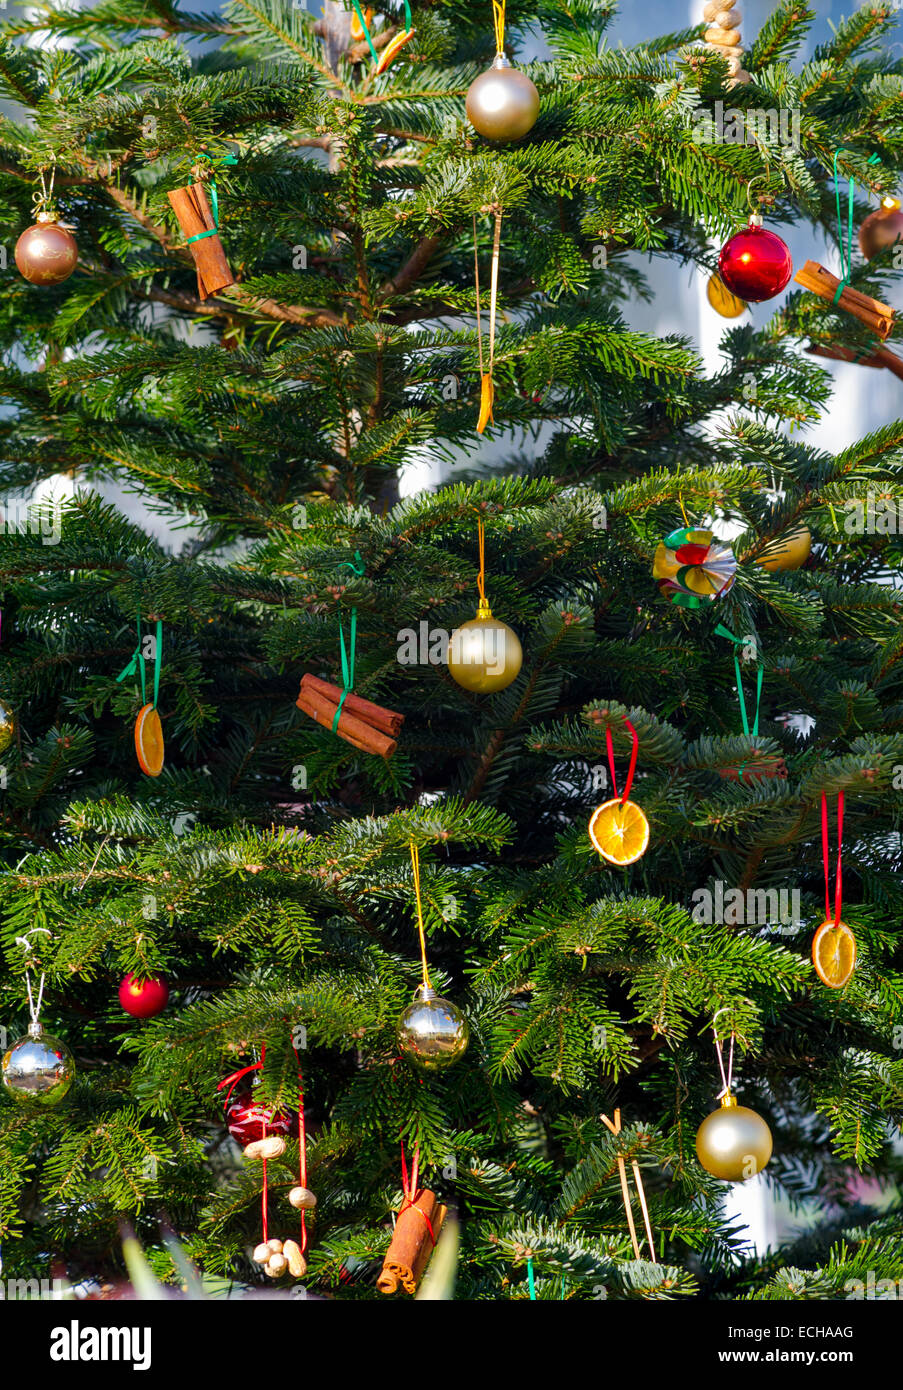 Christmas tree placed outside decorated with baubles and other decorations. Stock Photo